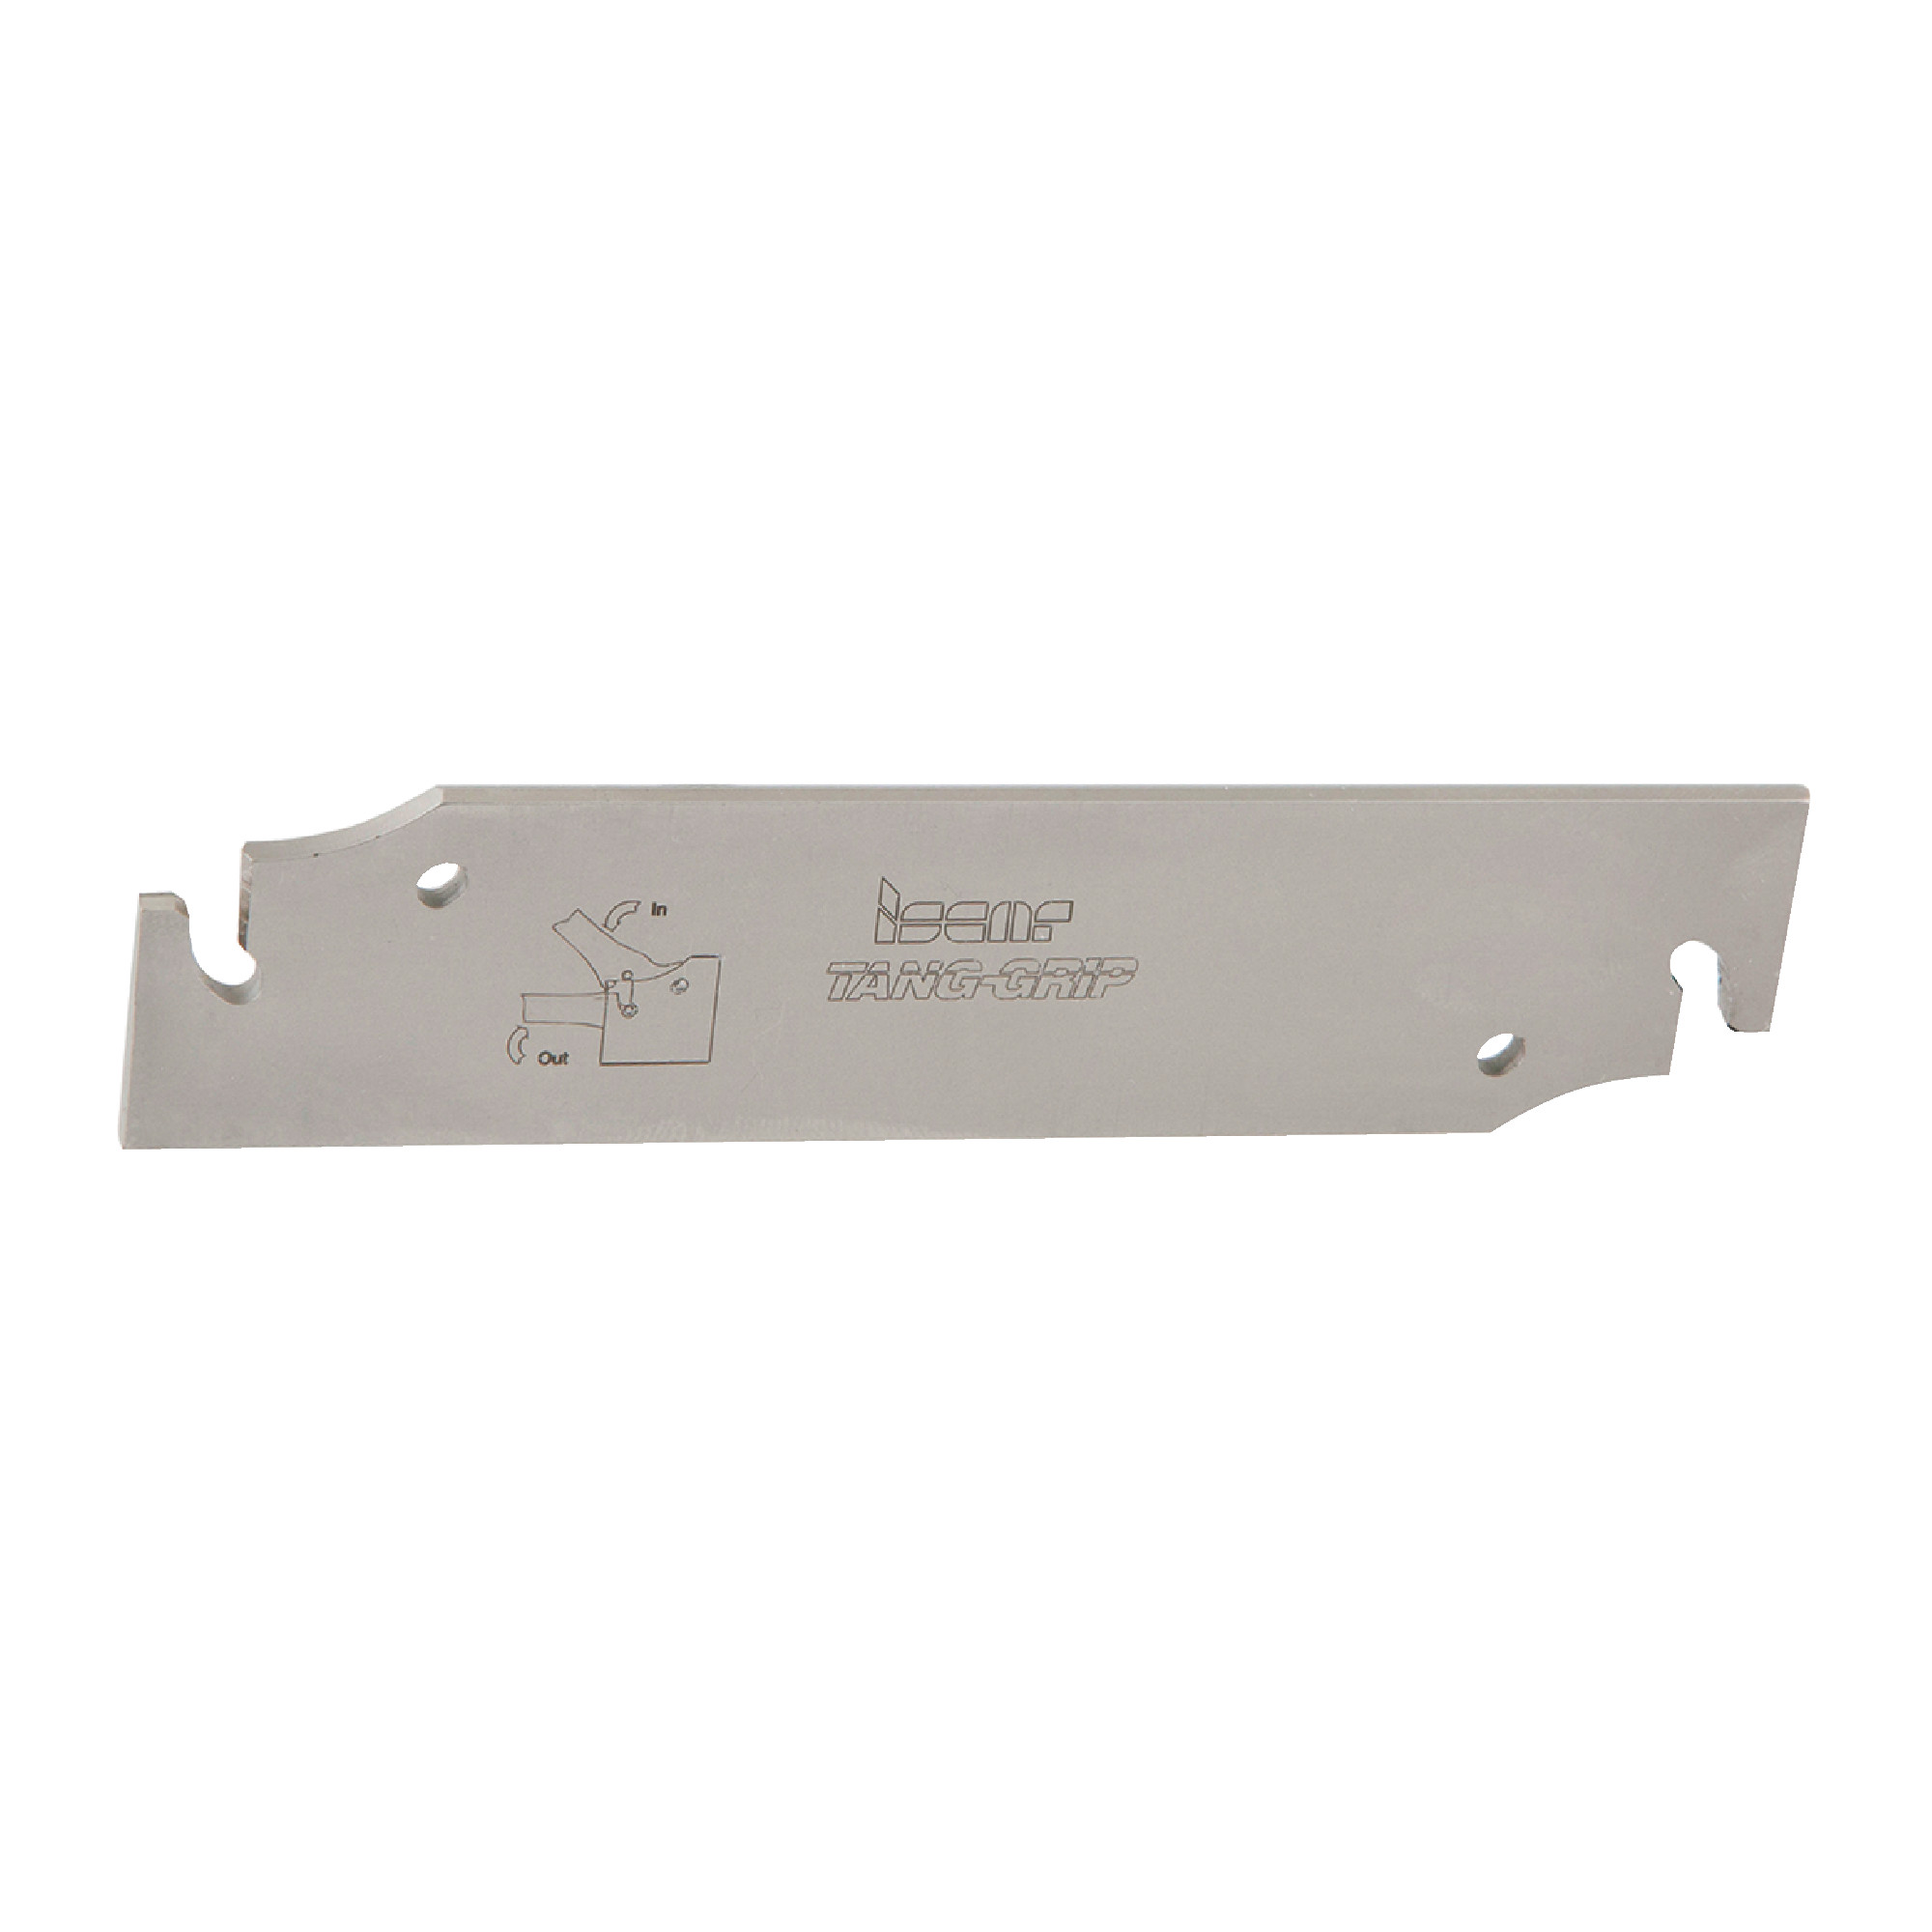 ISCAR - TGFH 32-4 Parting Blade / TAG N4 Inserts / 1.25" (32mm) Blade Height / NEUTRAL